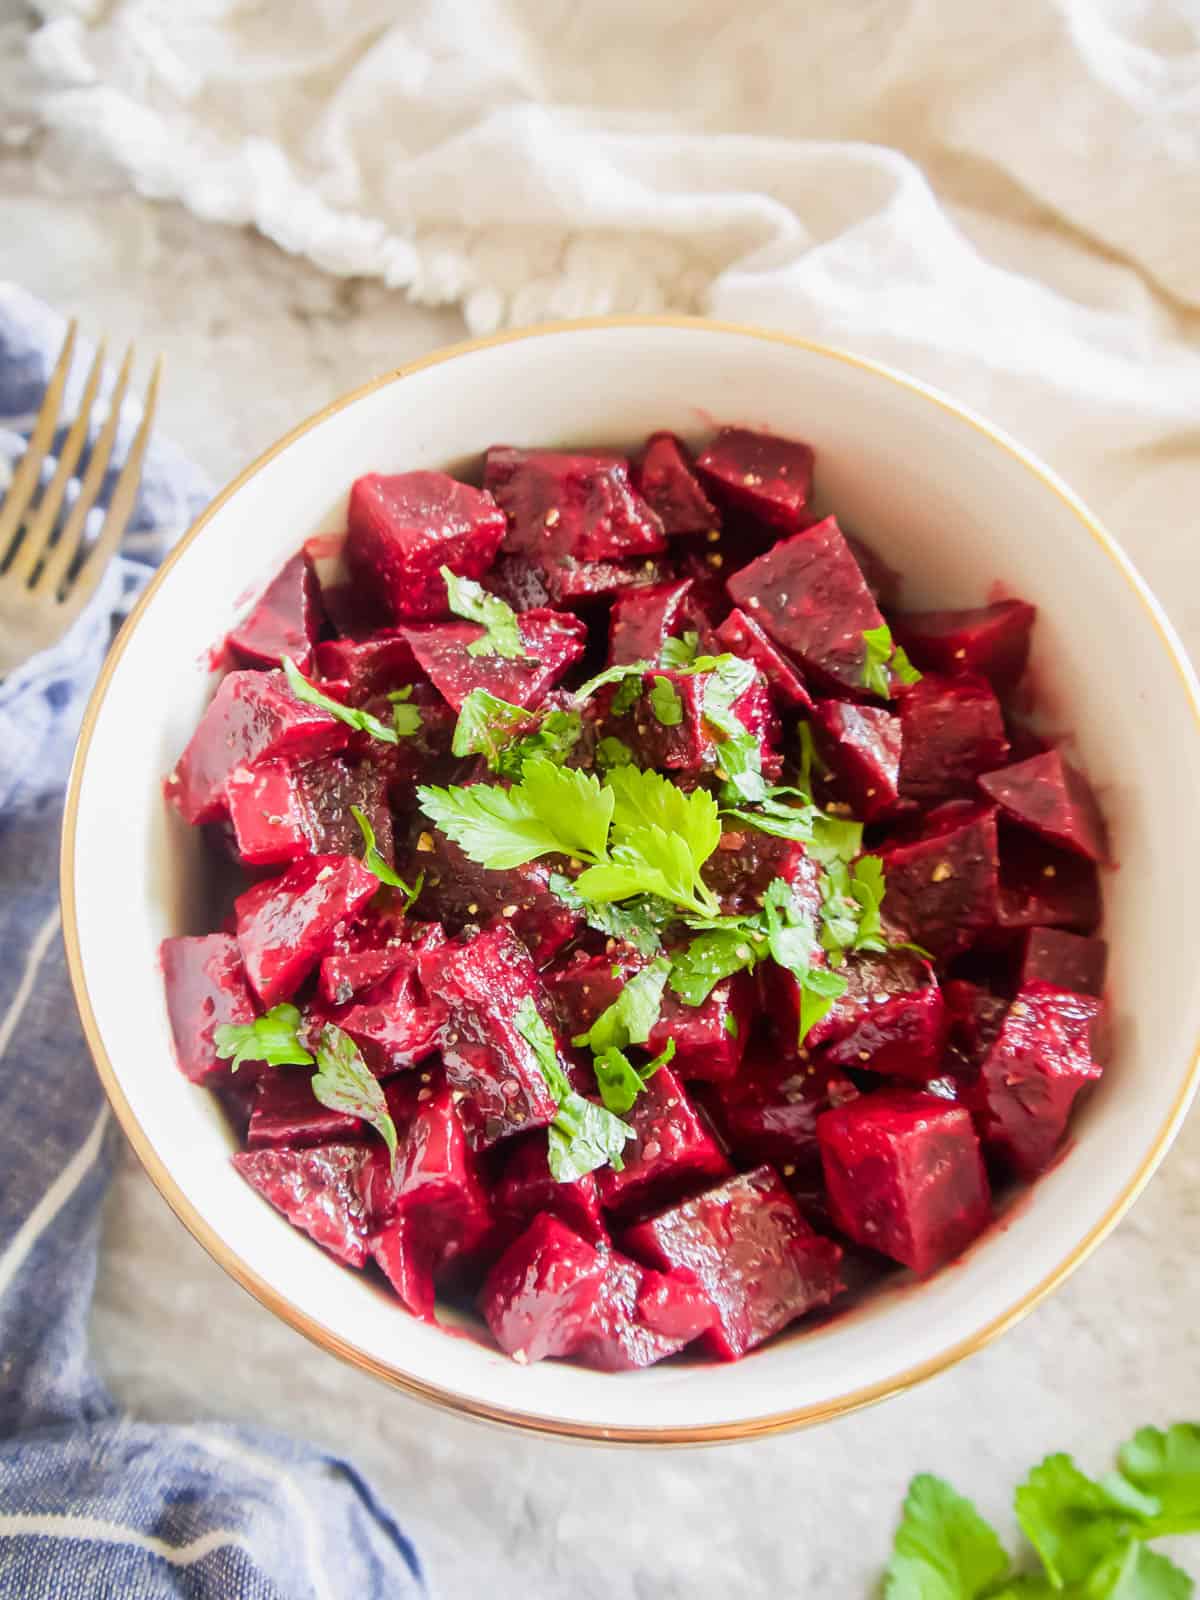 Beet Salad with Mustard Vinaigrette in a bowl.